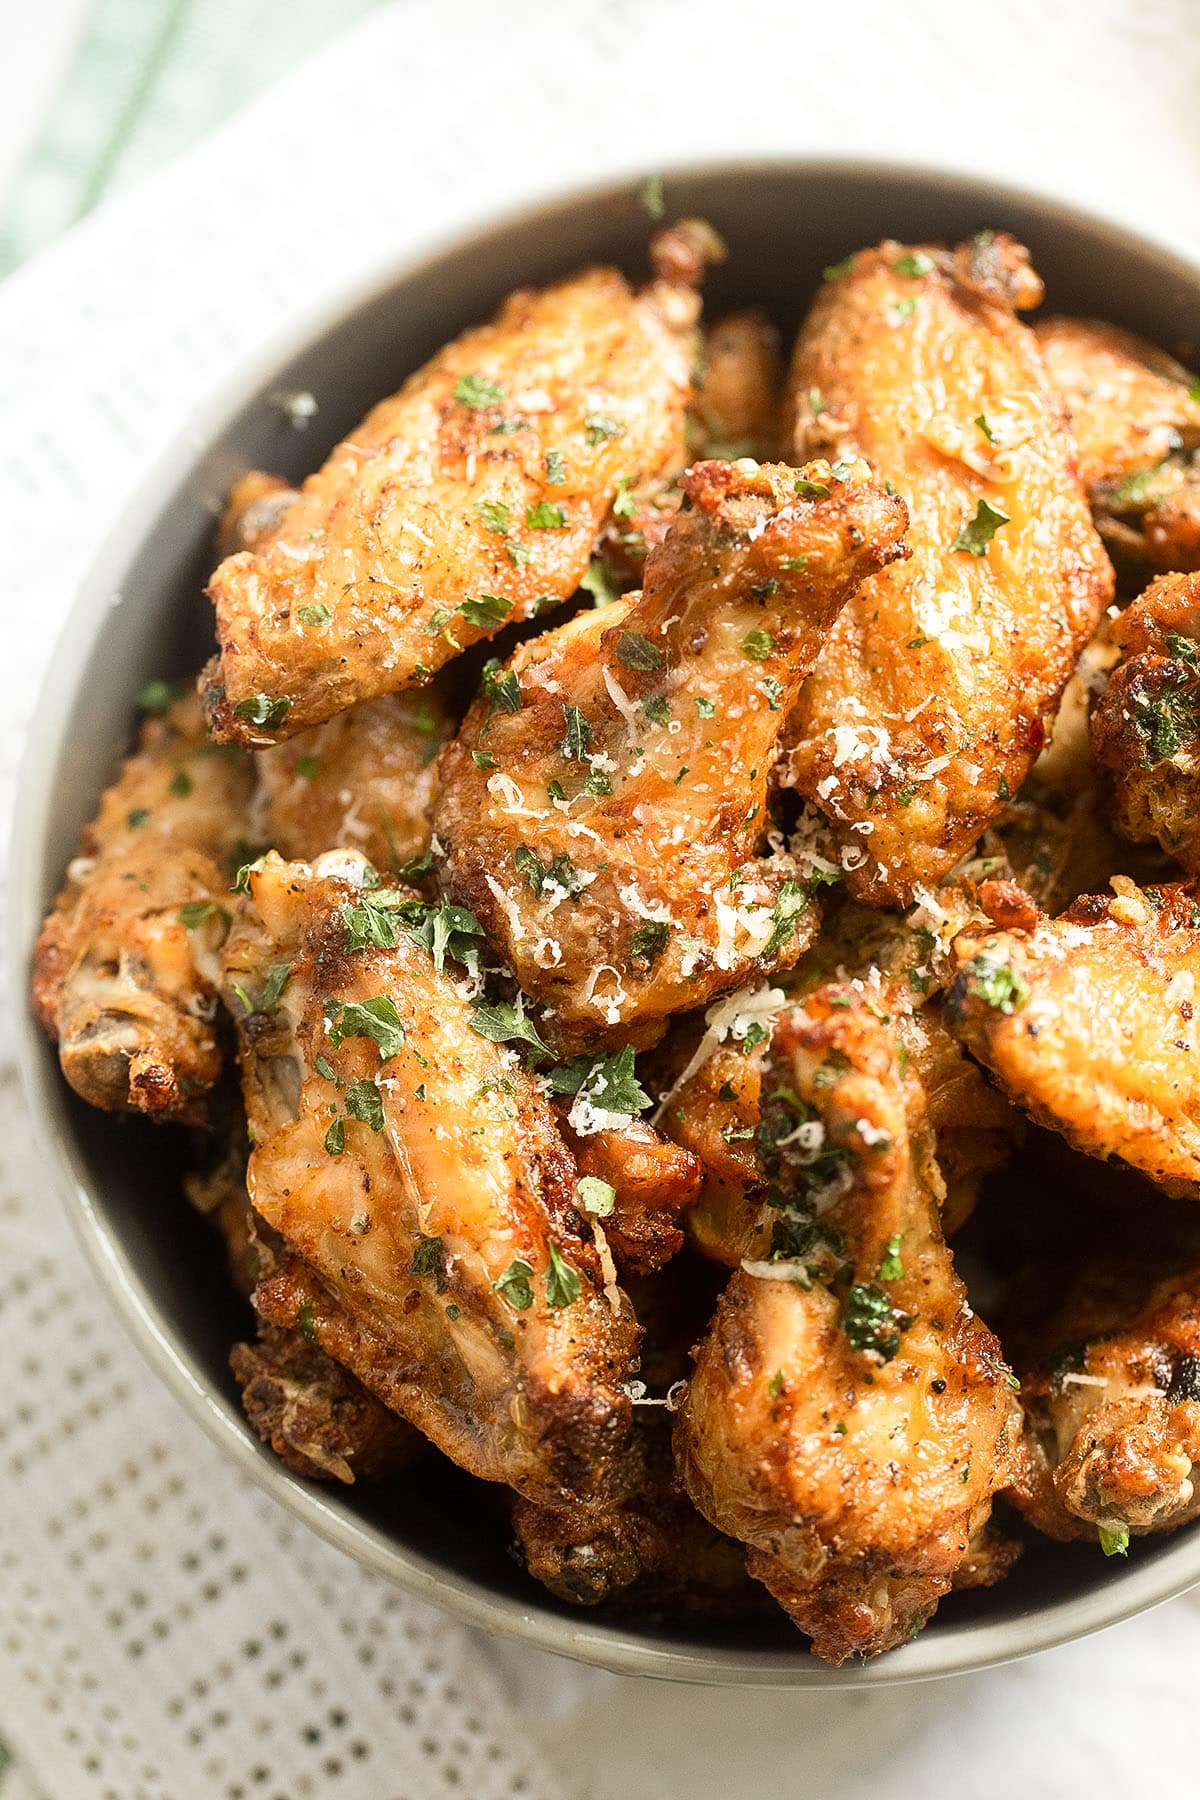 garlic parm wings in a bowl, sprinkled with parsley and cheese.